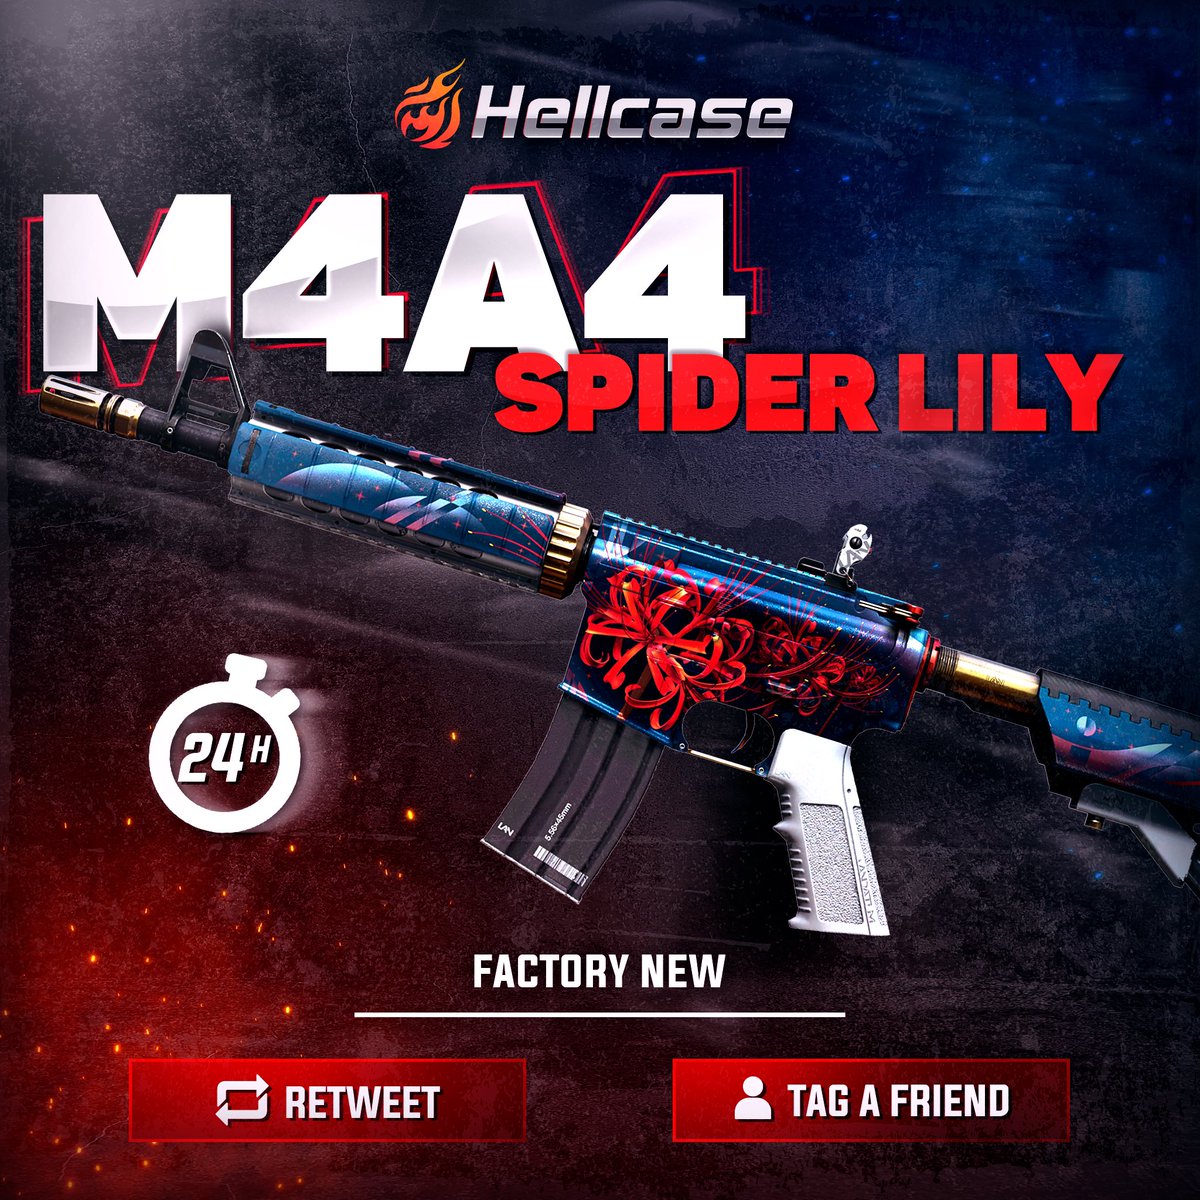 🎁 FAST GIVEAWAY 🏁

👇 Tag Your Best Friend & Like
🚀 Follow us
🔥 Retweet this post
😎 The winner of the previous giveaway is @RRazerz 

#hellcase #csgo #cs2 #csgoskin #csgoskins #csgoskinsgiveaway #csgocases #csgocase #hellcasegiveaway #csgoskinsfree #csgoskinsgiveaway